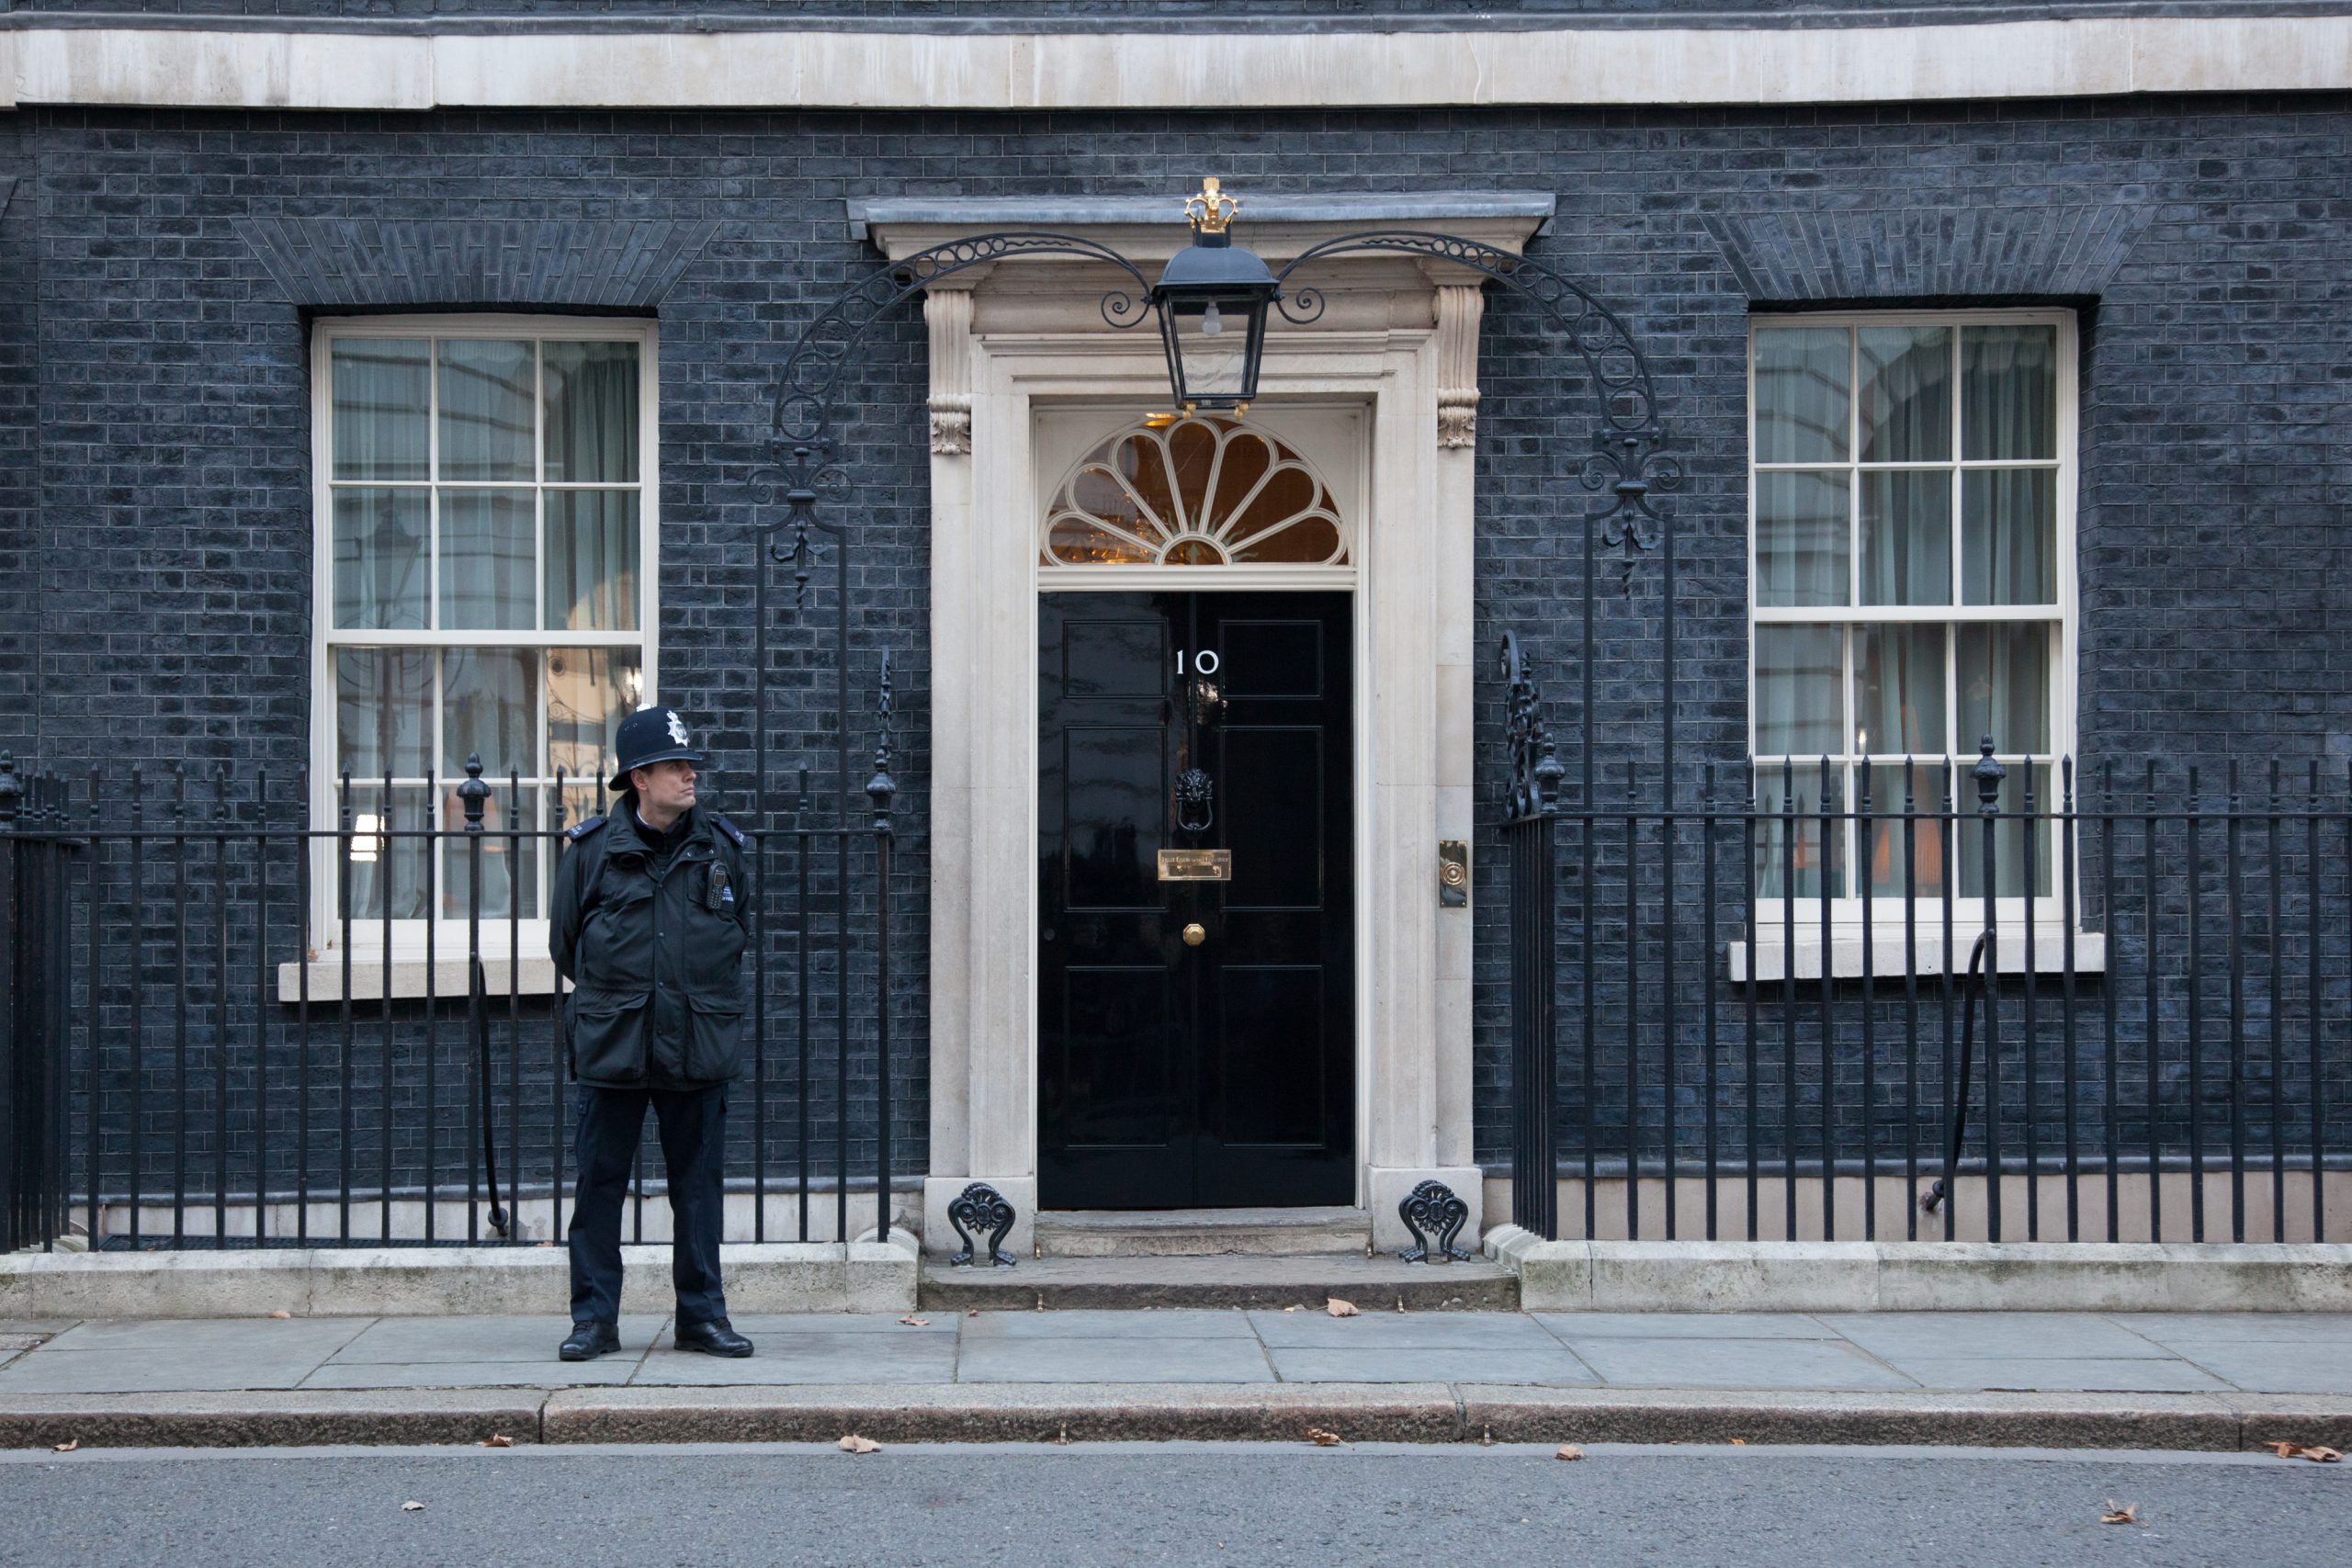 10 Downing Street in London, home of the British governments prime minister.